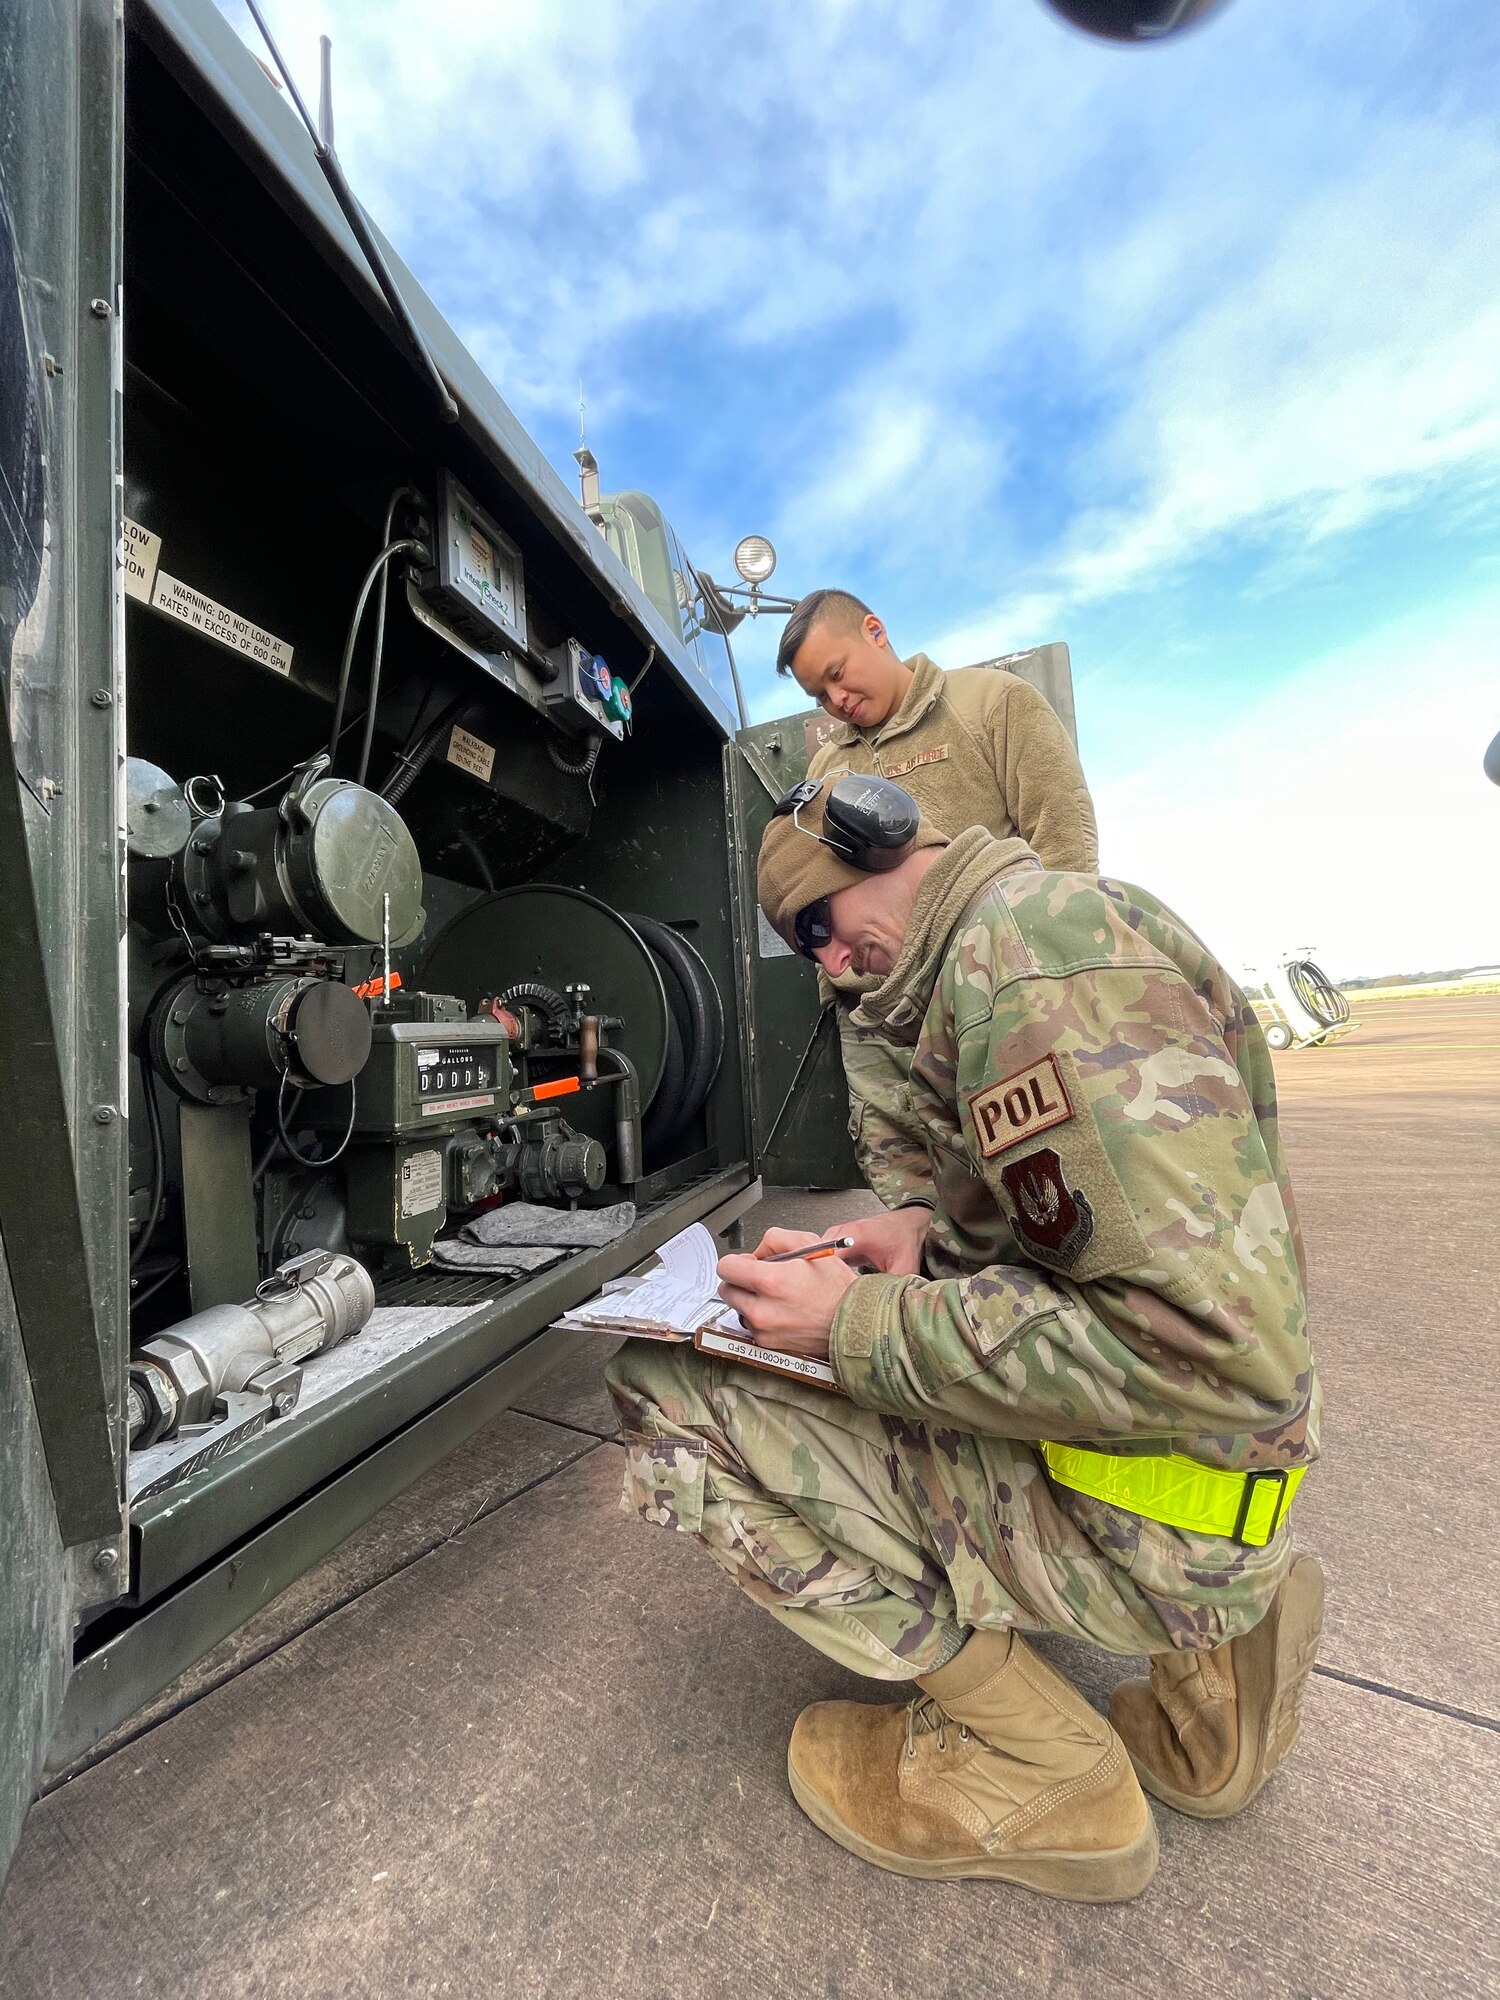 U.S. Air Force Airman 1st Class Taylor Williford, right, 100th Logistics Readiness Squadron fuels journeyman, accounts for diesel fuel while Senior Airman Arnuphap Parakawongnaayutdhaya, 100th LRS fuels journeyman, verifies his work during exercise Castle Forge at Royal Air Force Fairford, England, Nov. 3, 2021. Exercising elements of Agile Combat Employment enables U.S. forces in Europe to operate from locations with varying levels of capacity and support, ensuring Airmen and aircrews are postured to deliver lethal combat power across the spectrum of military operations. In addition to F-15 Eagle aircraft operations in the Black Sea Region, Castle Forge encompasses the USAFE-wide ACE capstone event. Castle Forge’s components will better enable forces to quickly disperse and continue to deliver air power from locations with varying levels of capacity and support, ensuring Airmen are always ready to respond to potential threats. (U.S. Air Force photo by Senior Airman Joseph Barron)